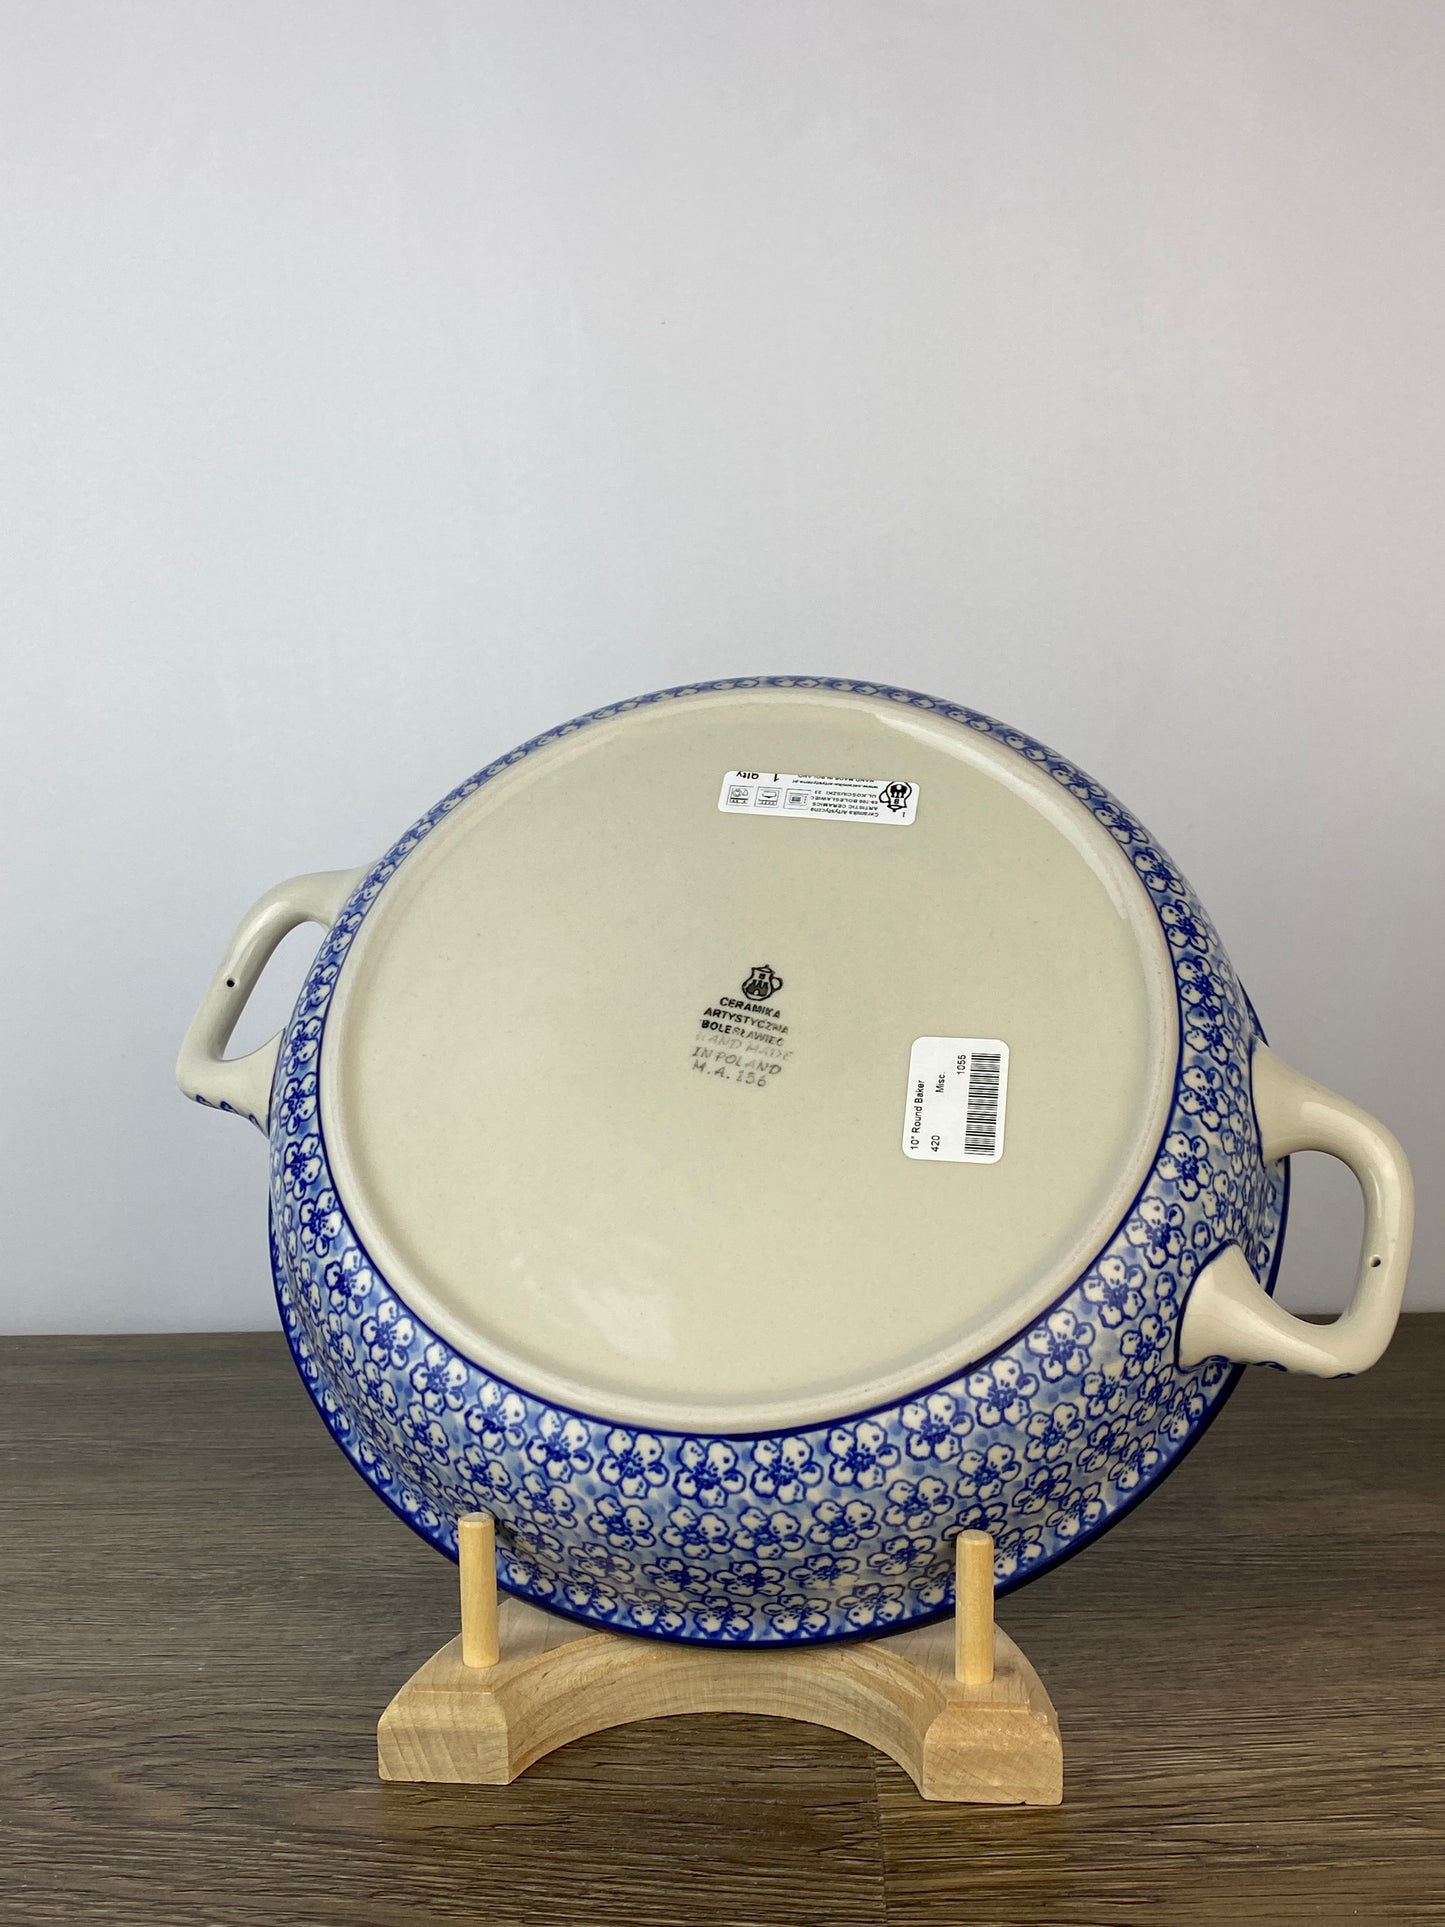 10" Round Baker With Handles - Shape 420 - Pattern 2176